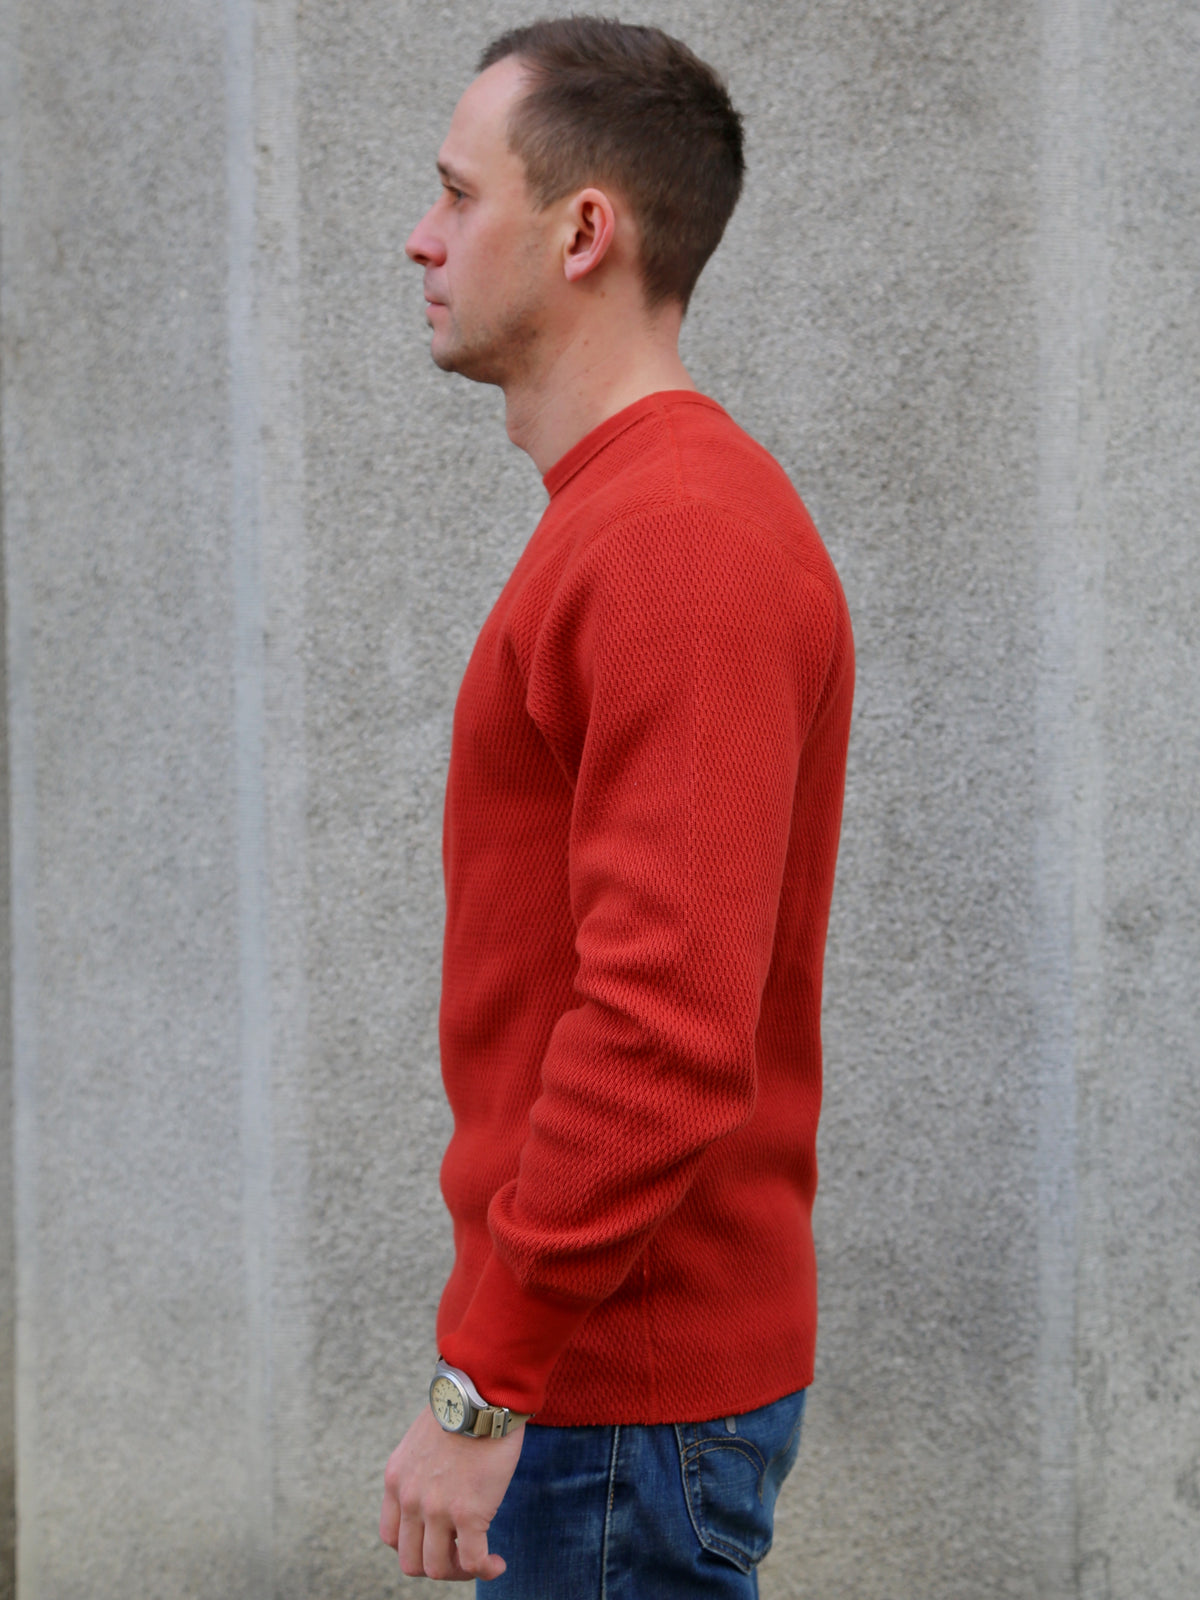 The Real McCoy's Honeycomb Thermal Shirt – Red (MC23115)